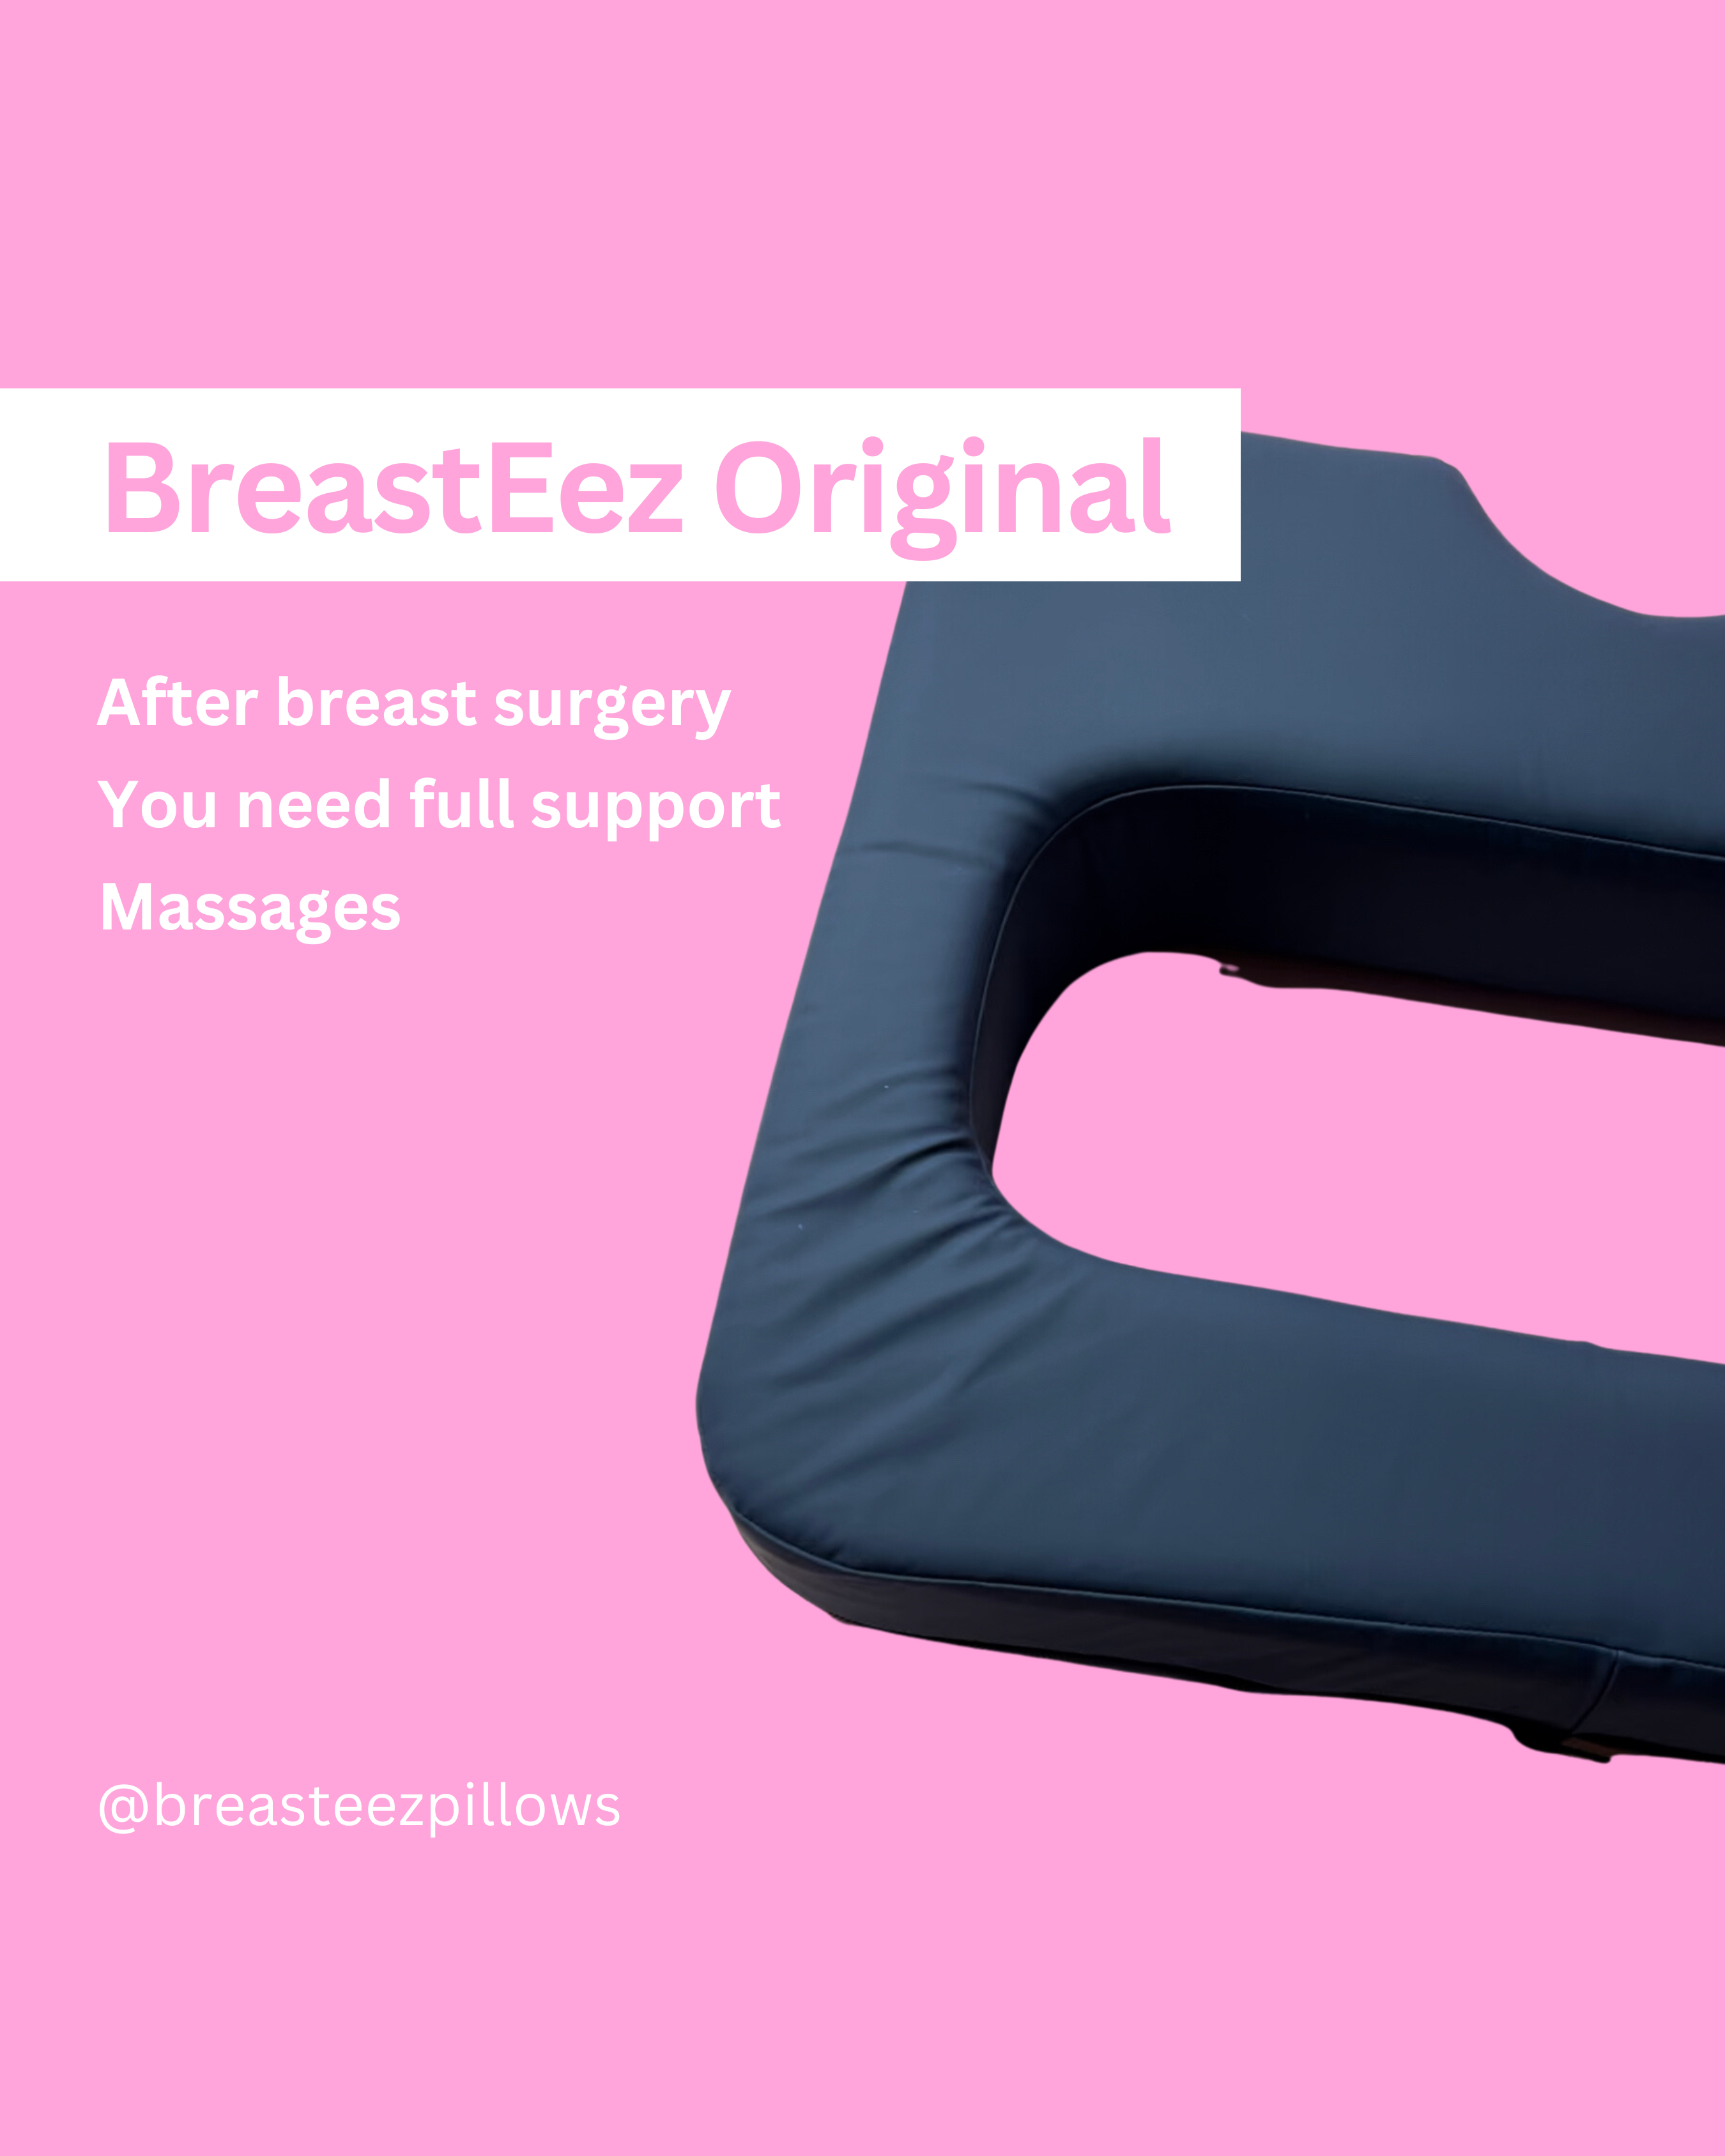 Medical Grade Breast Support Pillow- OUT OF STOCK - Pre order available